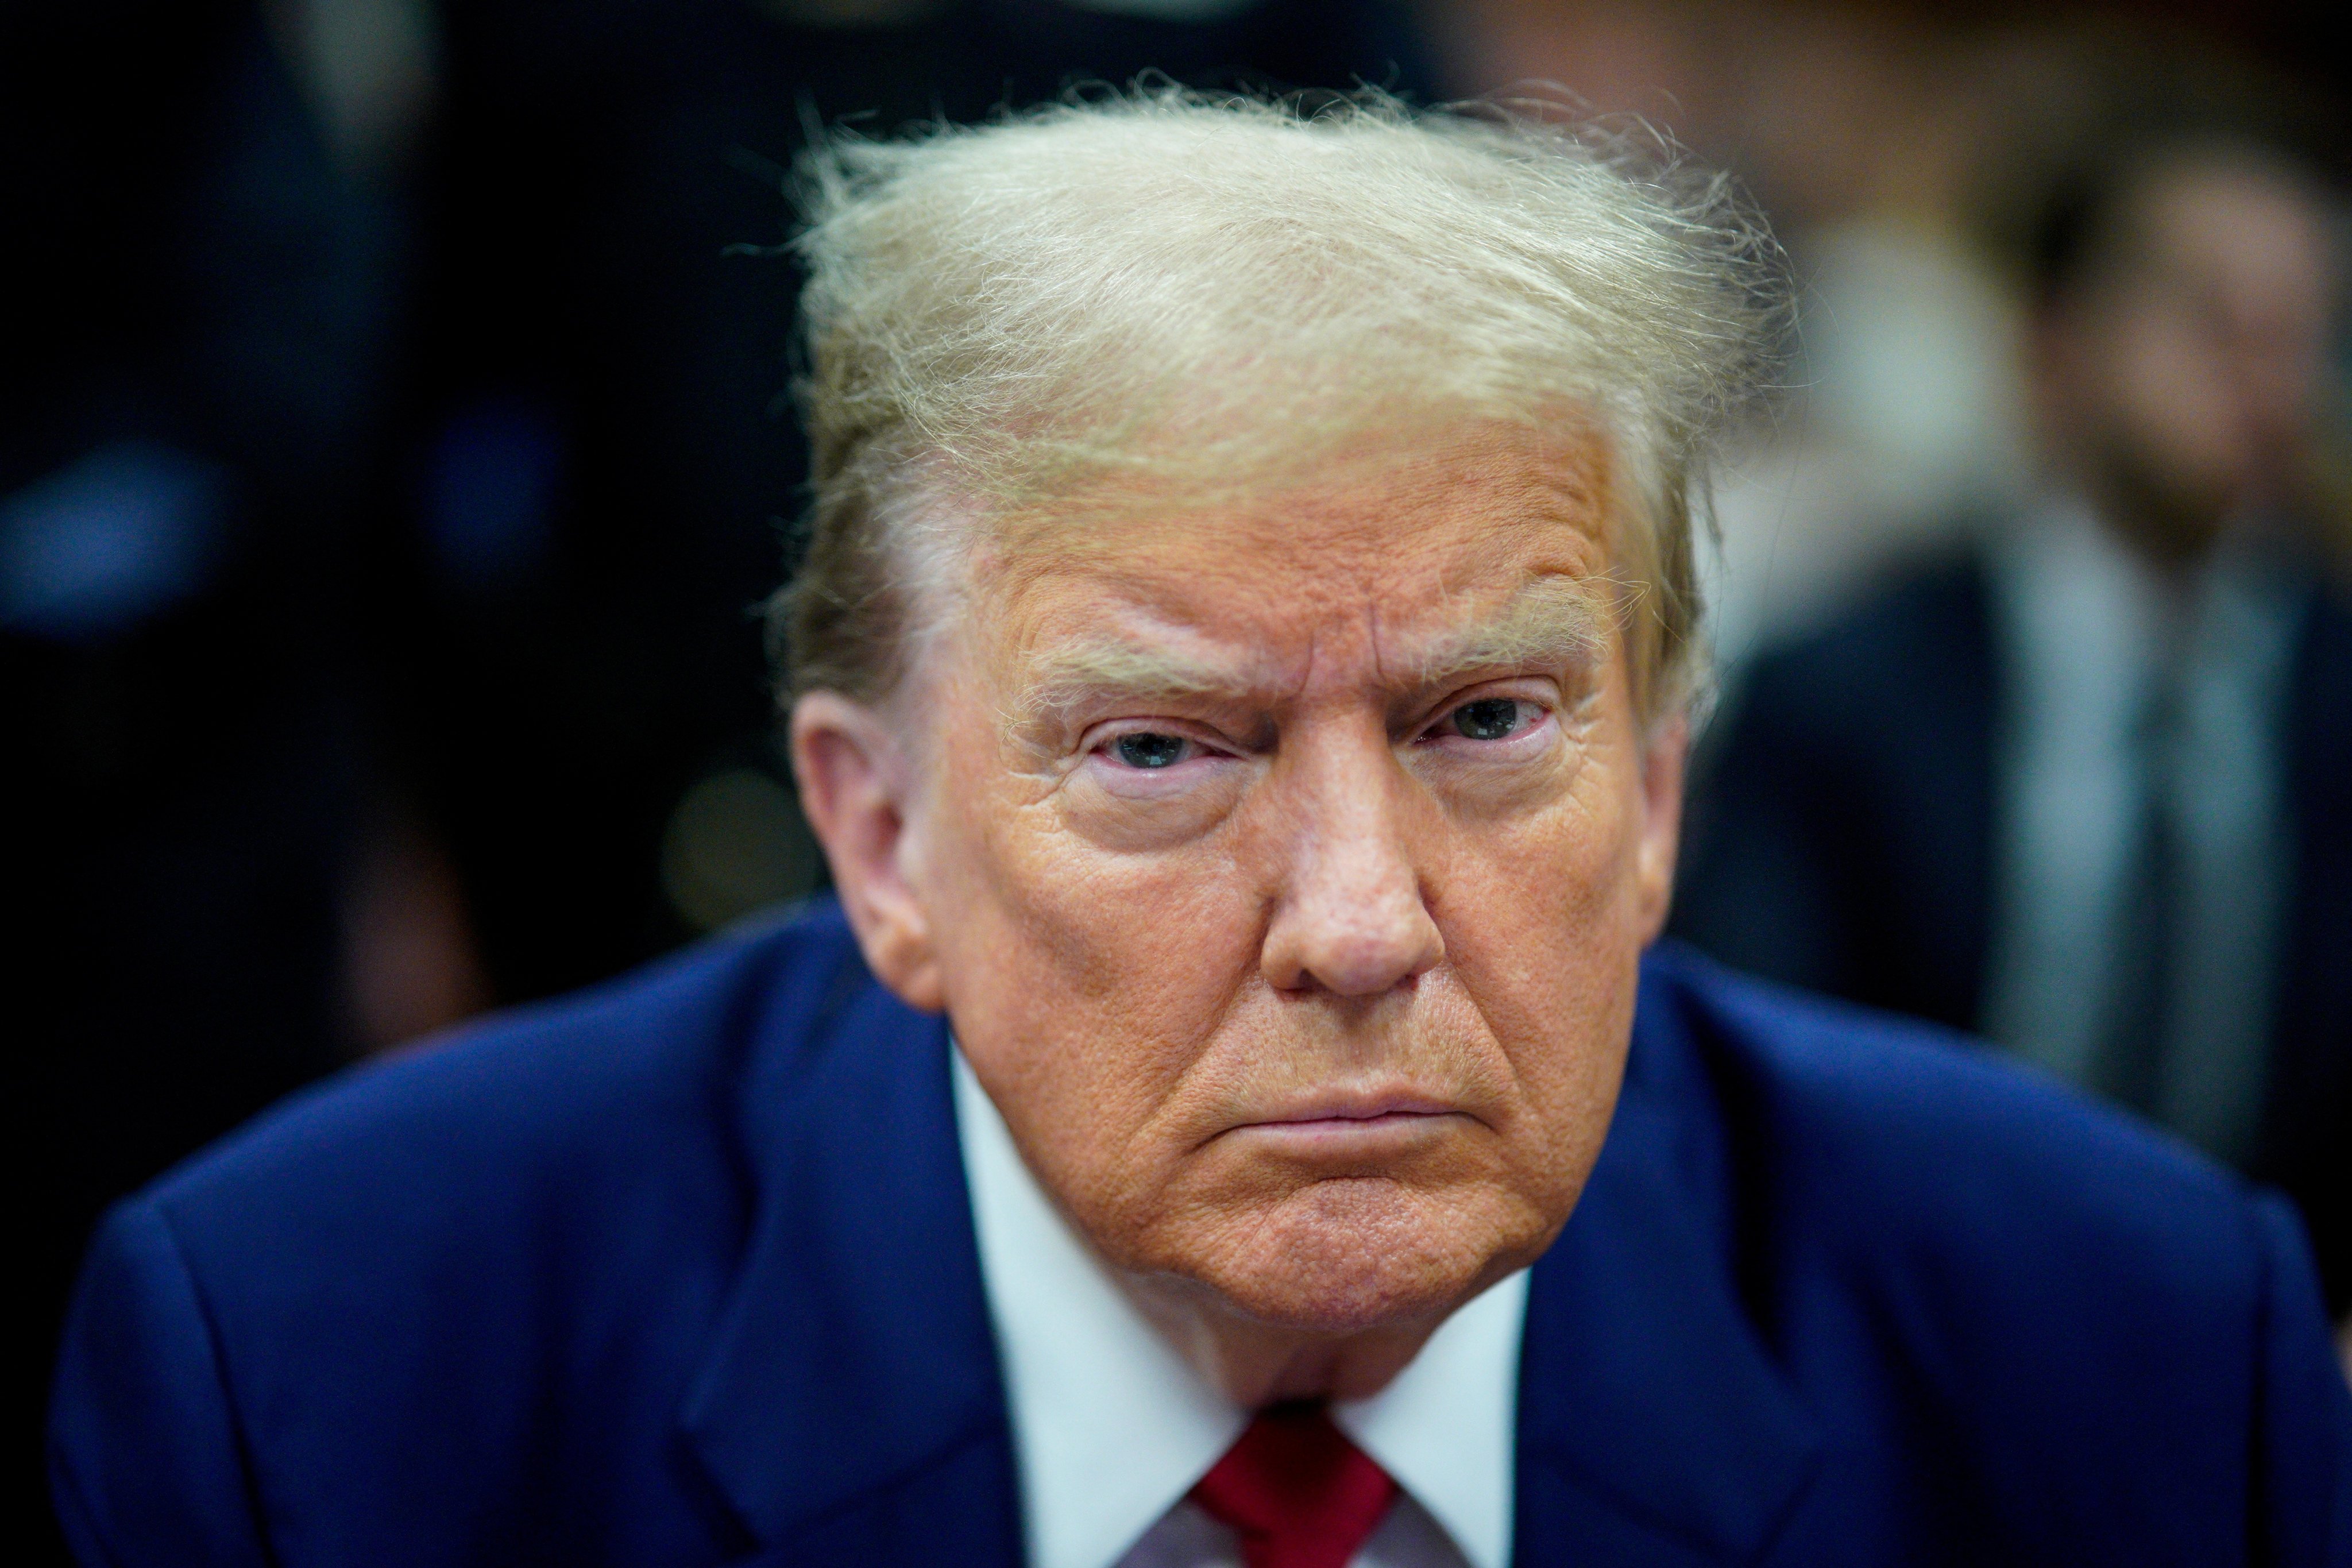 Judge Juan M. Merchan warned former US president Donald Trump that he could face jail if he continued to violate a gag order that barred him from making public statements about witnesses, jurors and others connected to his New York hush money case. Photo: Reuters/Pool